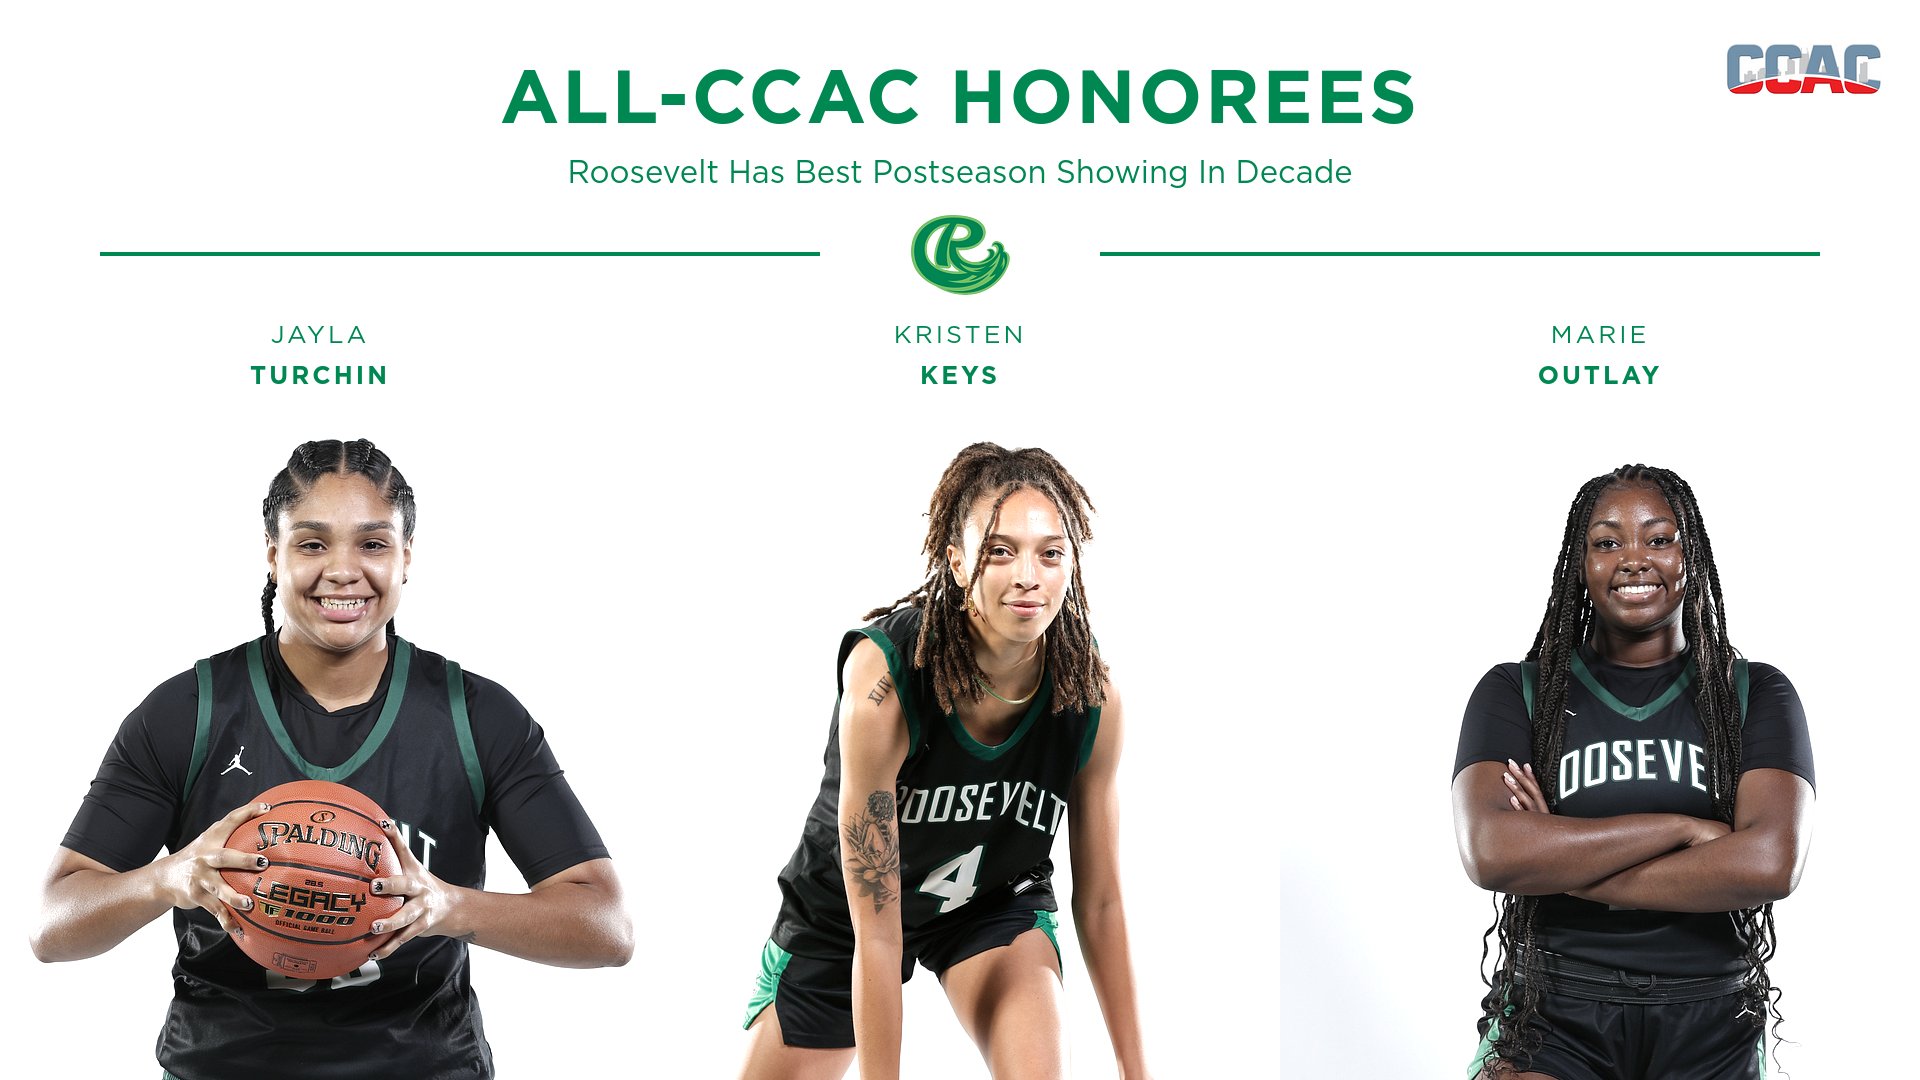 Outlay Earns Two Awards, Turchin, Keys Named All-CCAC